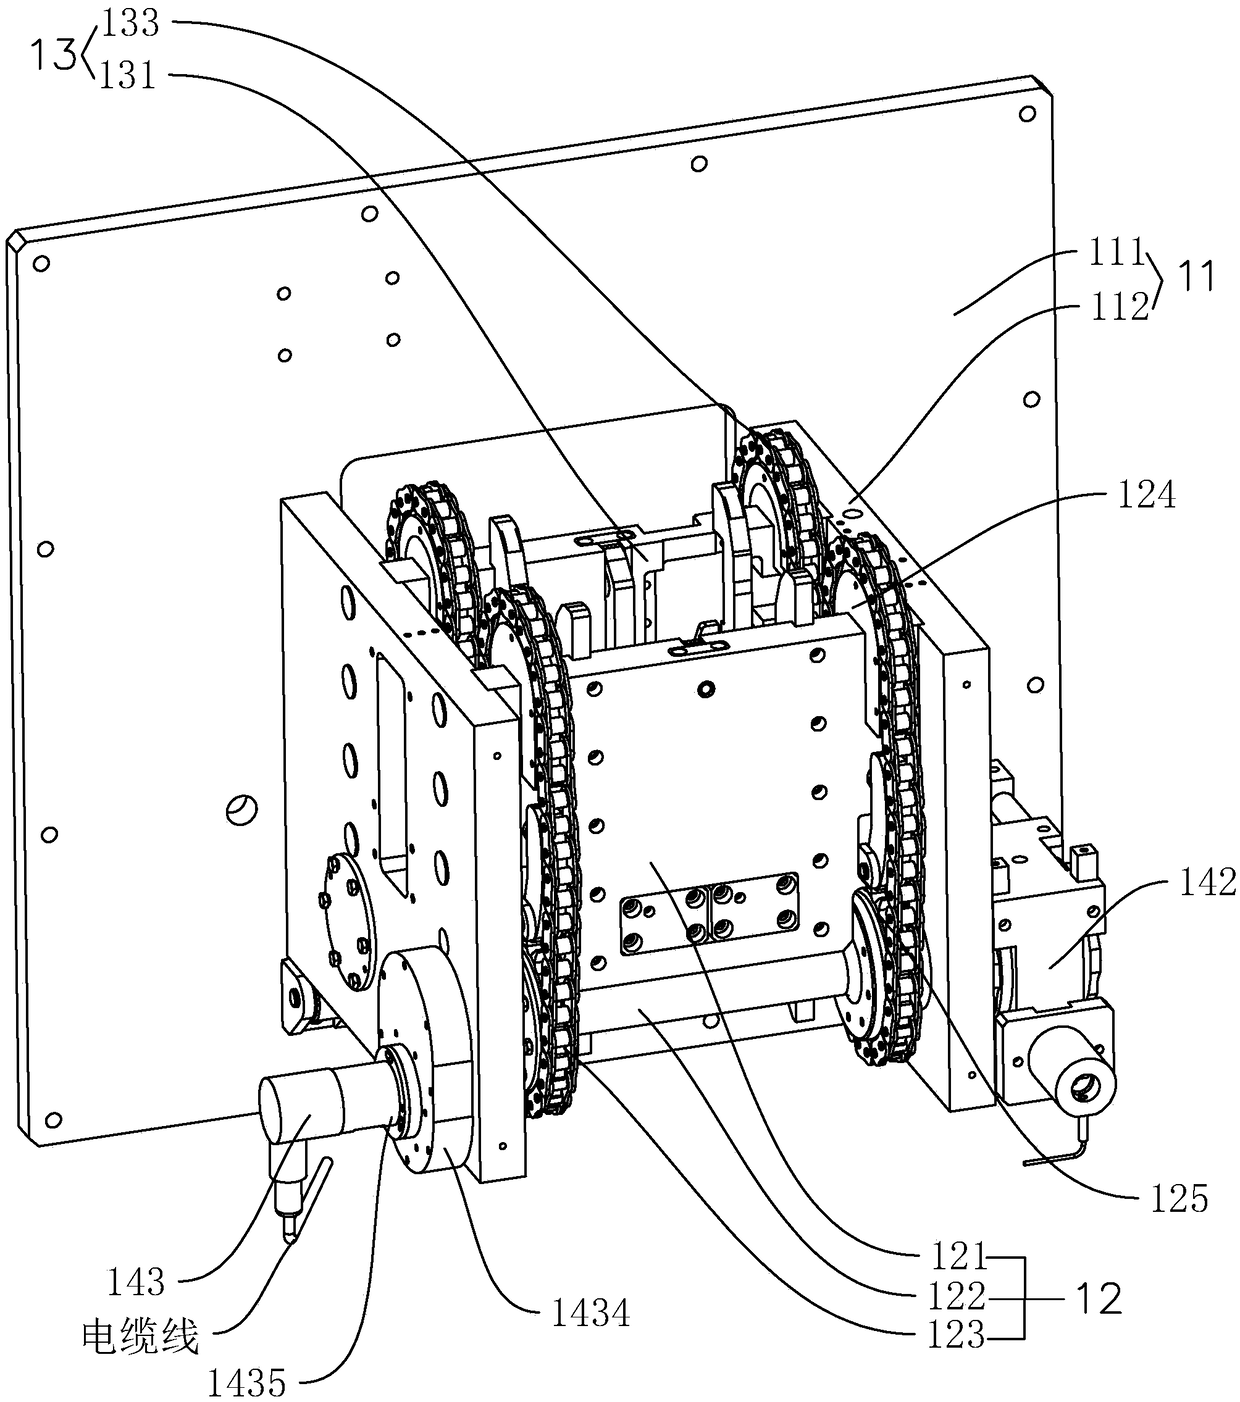 Main power system for transverse sealing clamping jaw mechanism